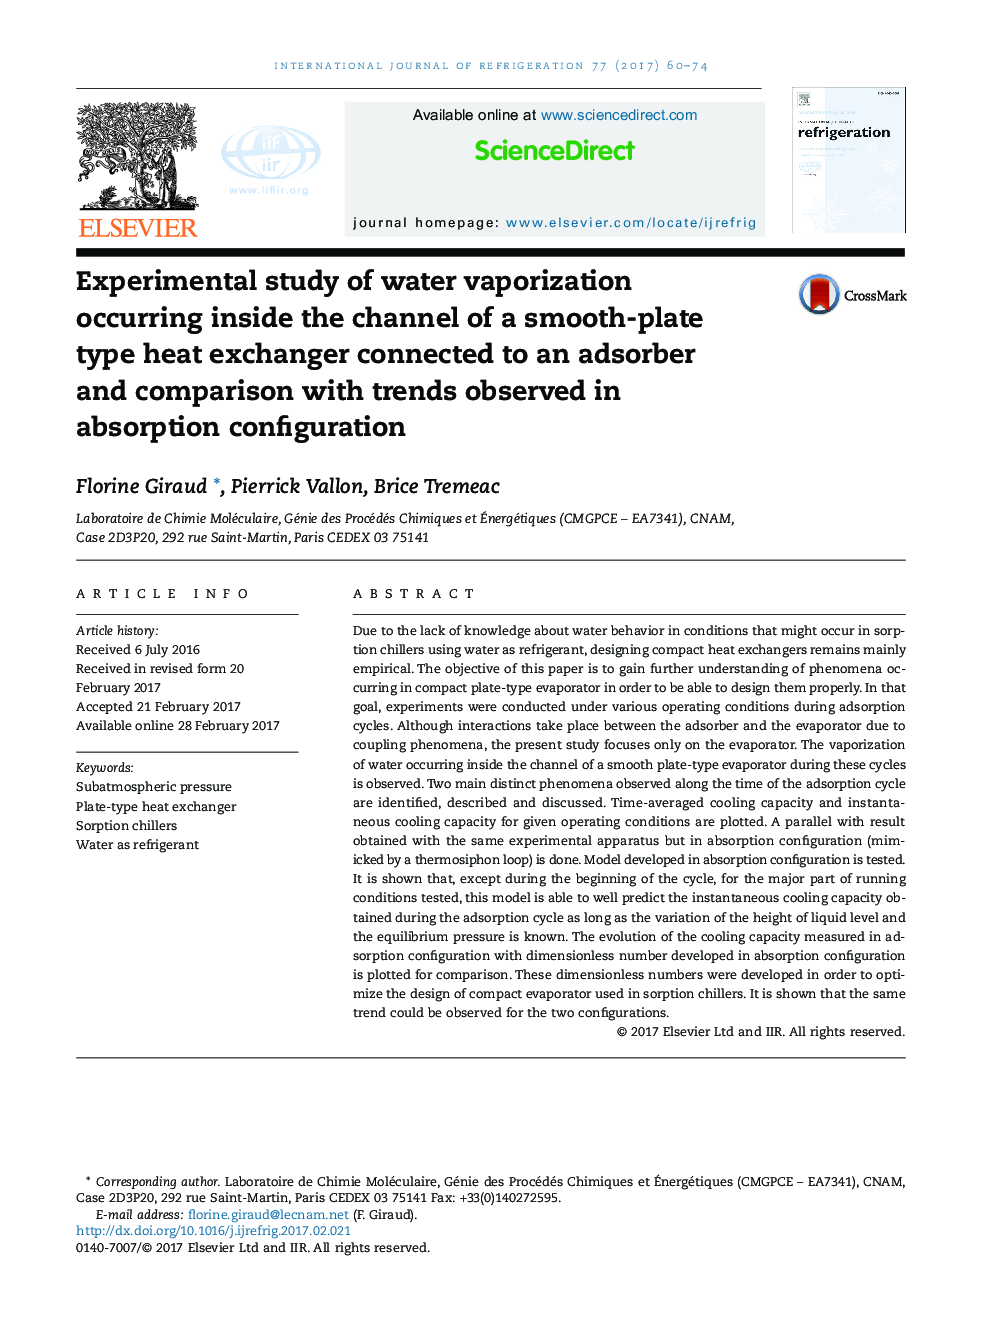 Experimental study of water vaporization occurring inside the channel of a smooth-plate type heat exchanger connected to an adsorber and comparison with trends observed in absorption configuration